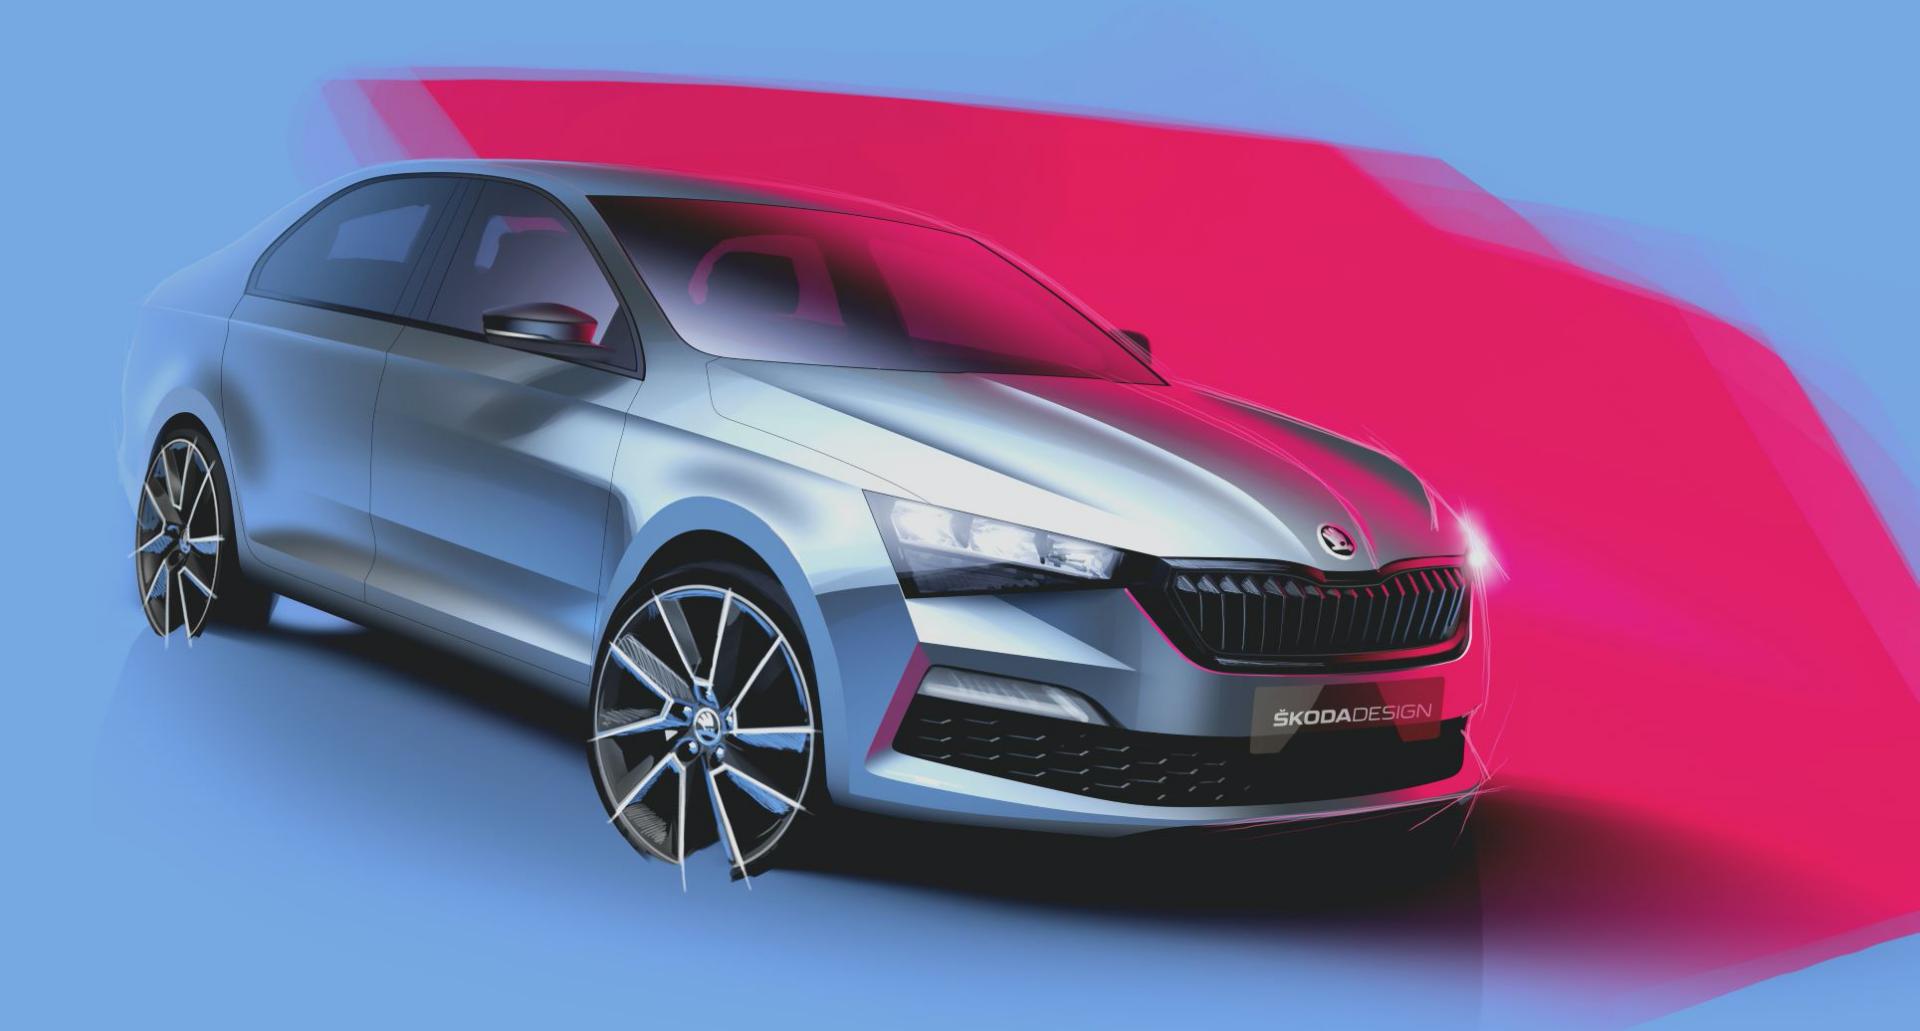 2020 Skoda Rapid For Russia Teased Again In Official Images